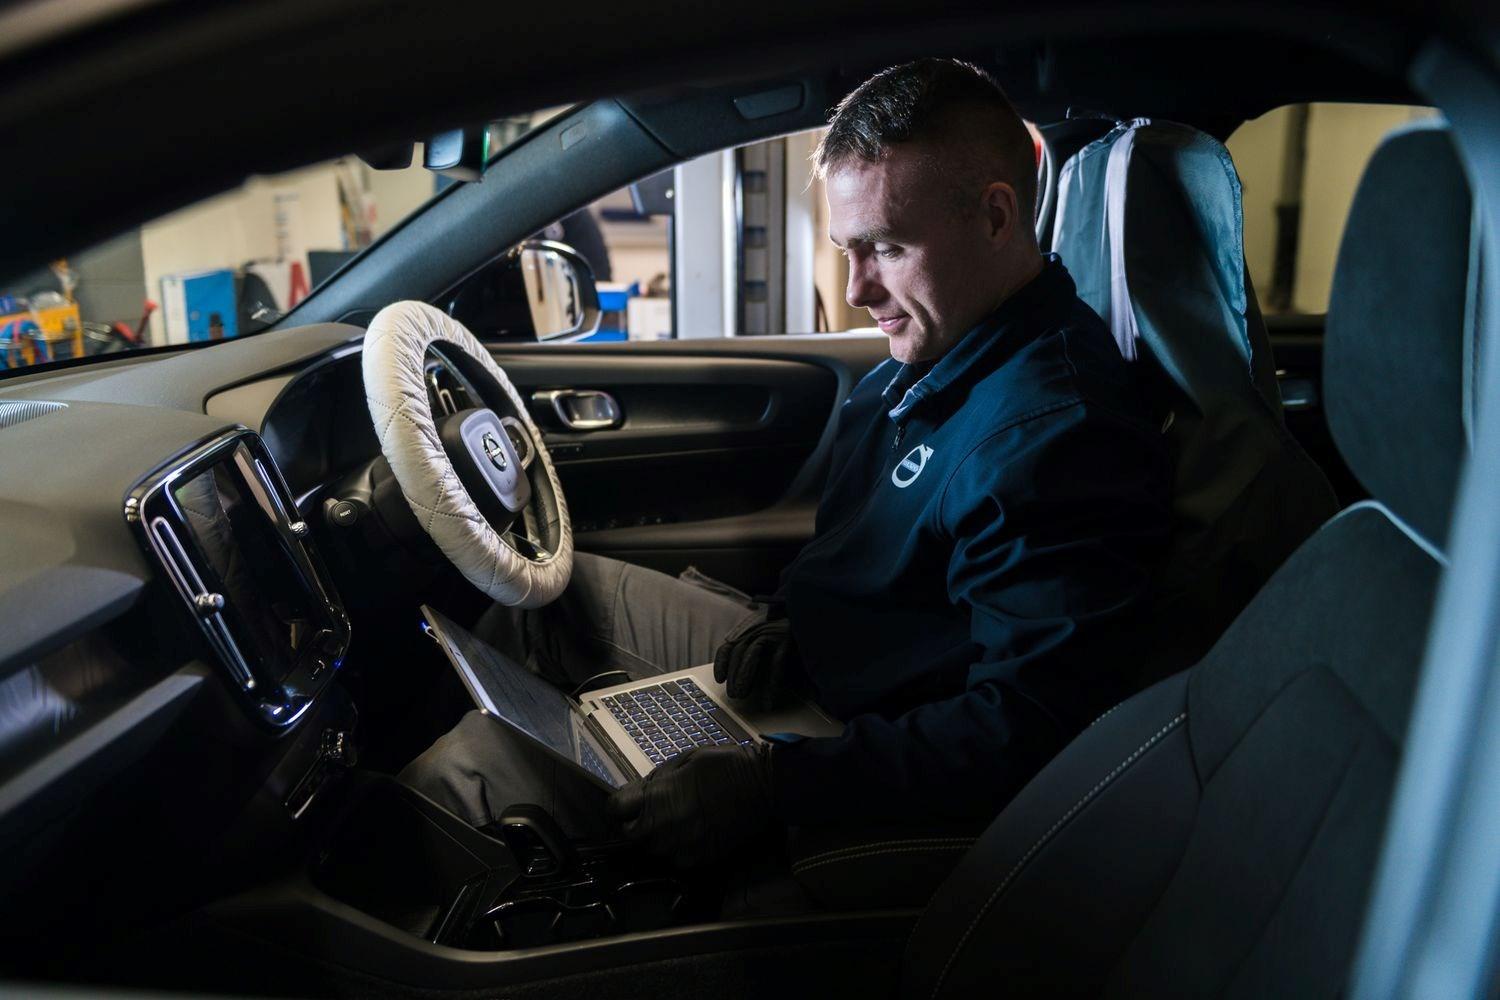 Servicing and Maintenance at Agnew Belfast Volvo, Volvo Mechanic inspects the inside of a used Volvo using a laptop during MOT preparation